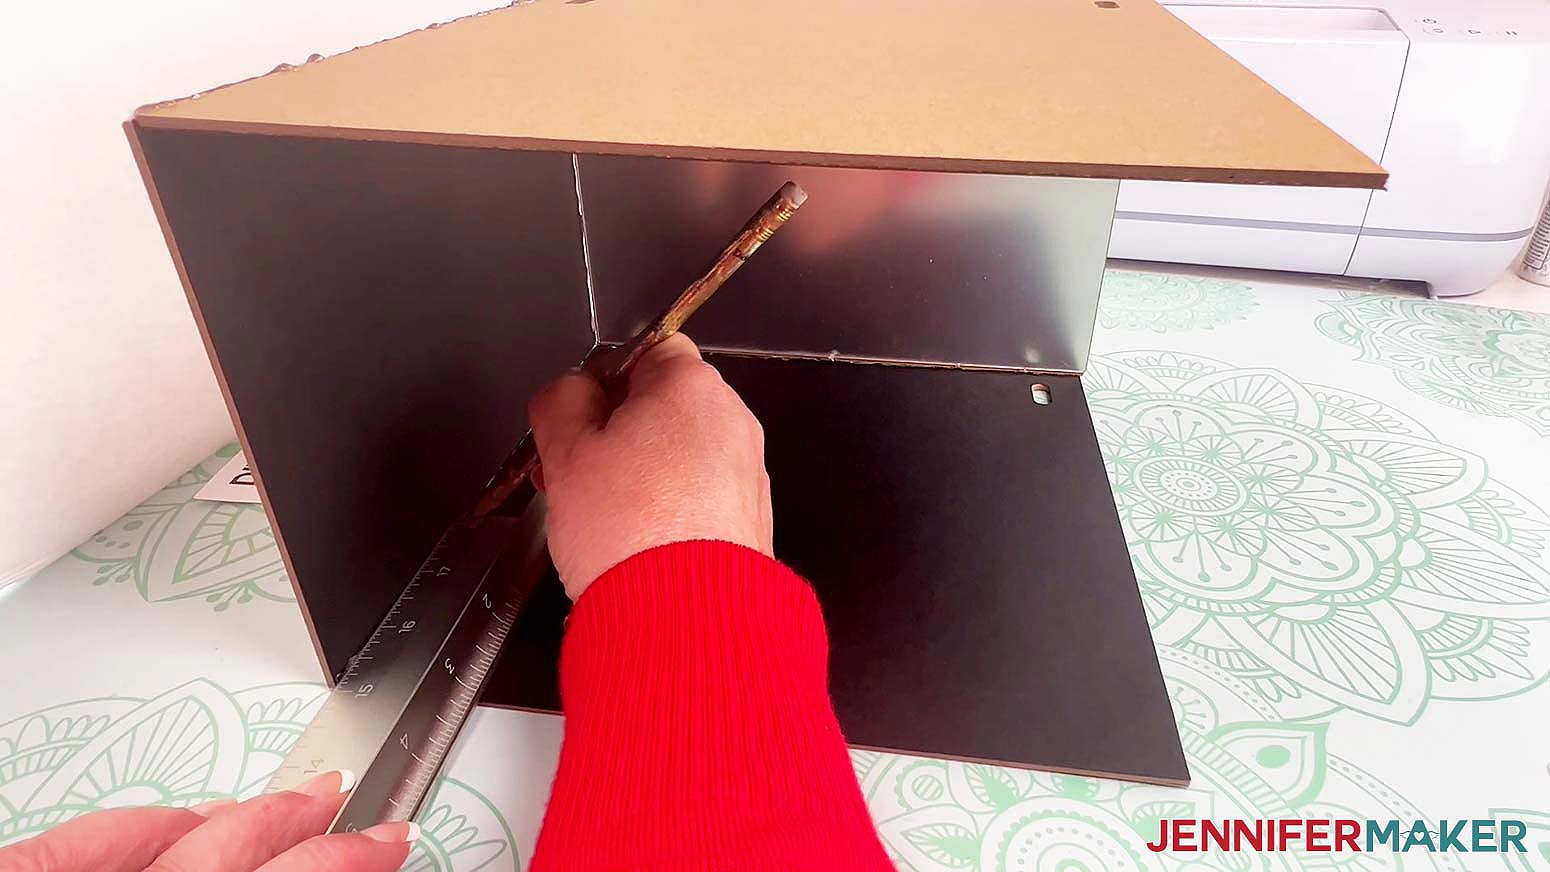 Mark the intended front mirror placement on the inside of the diy book nook box with a ruler and pen or pencil